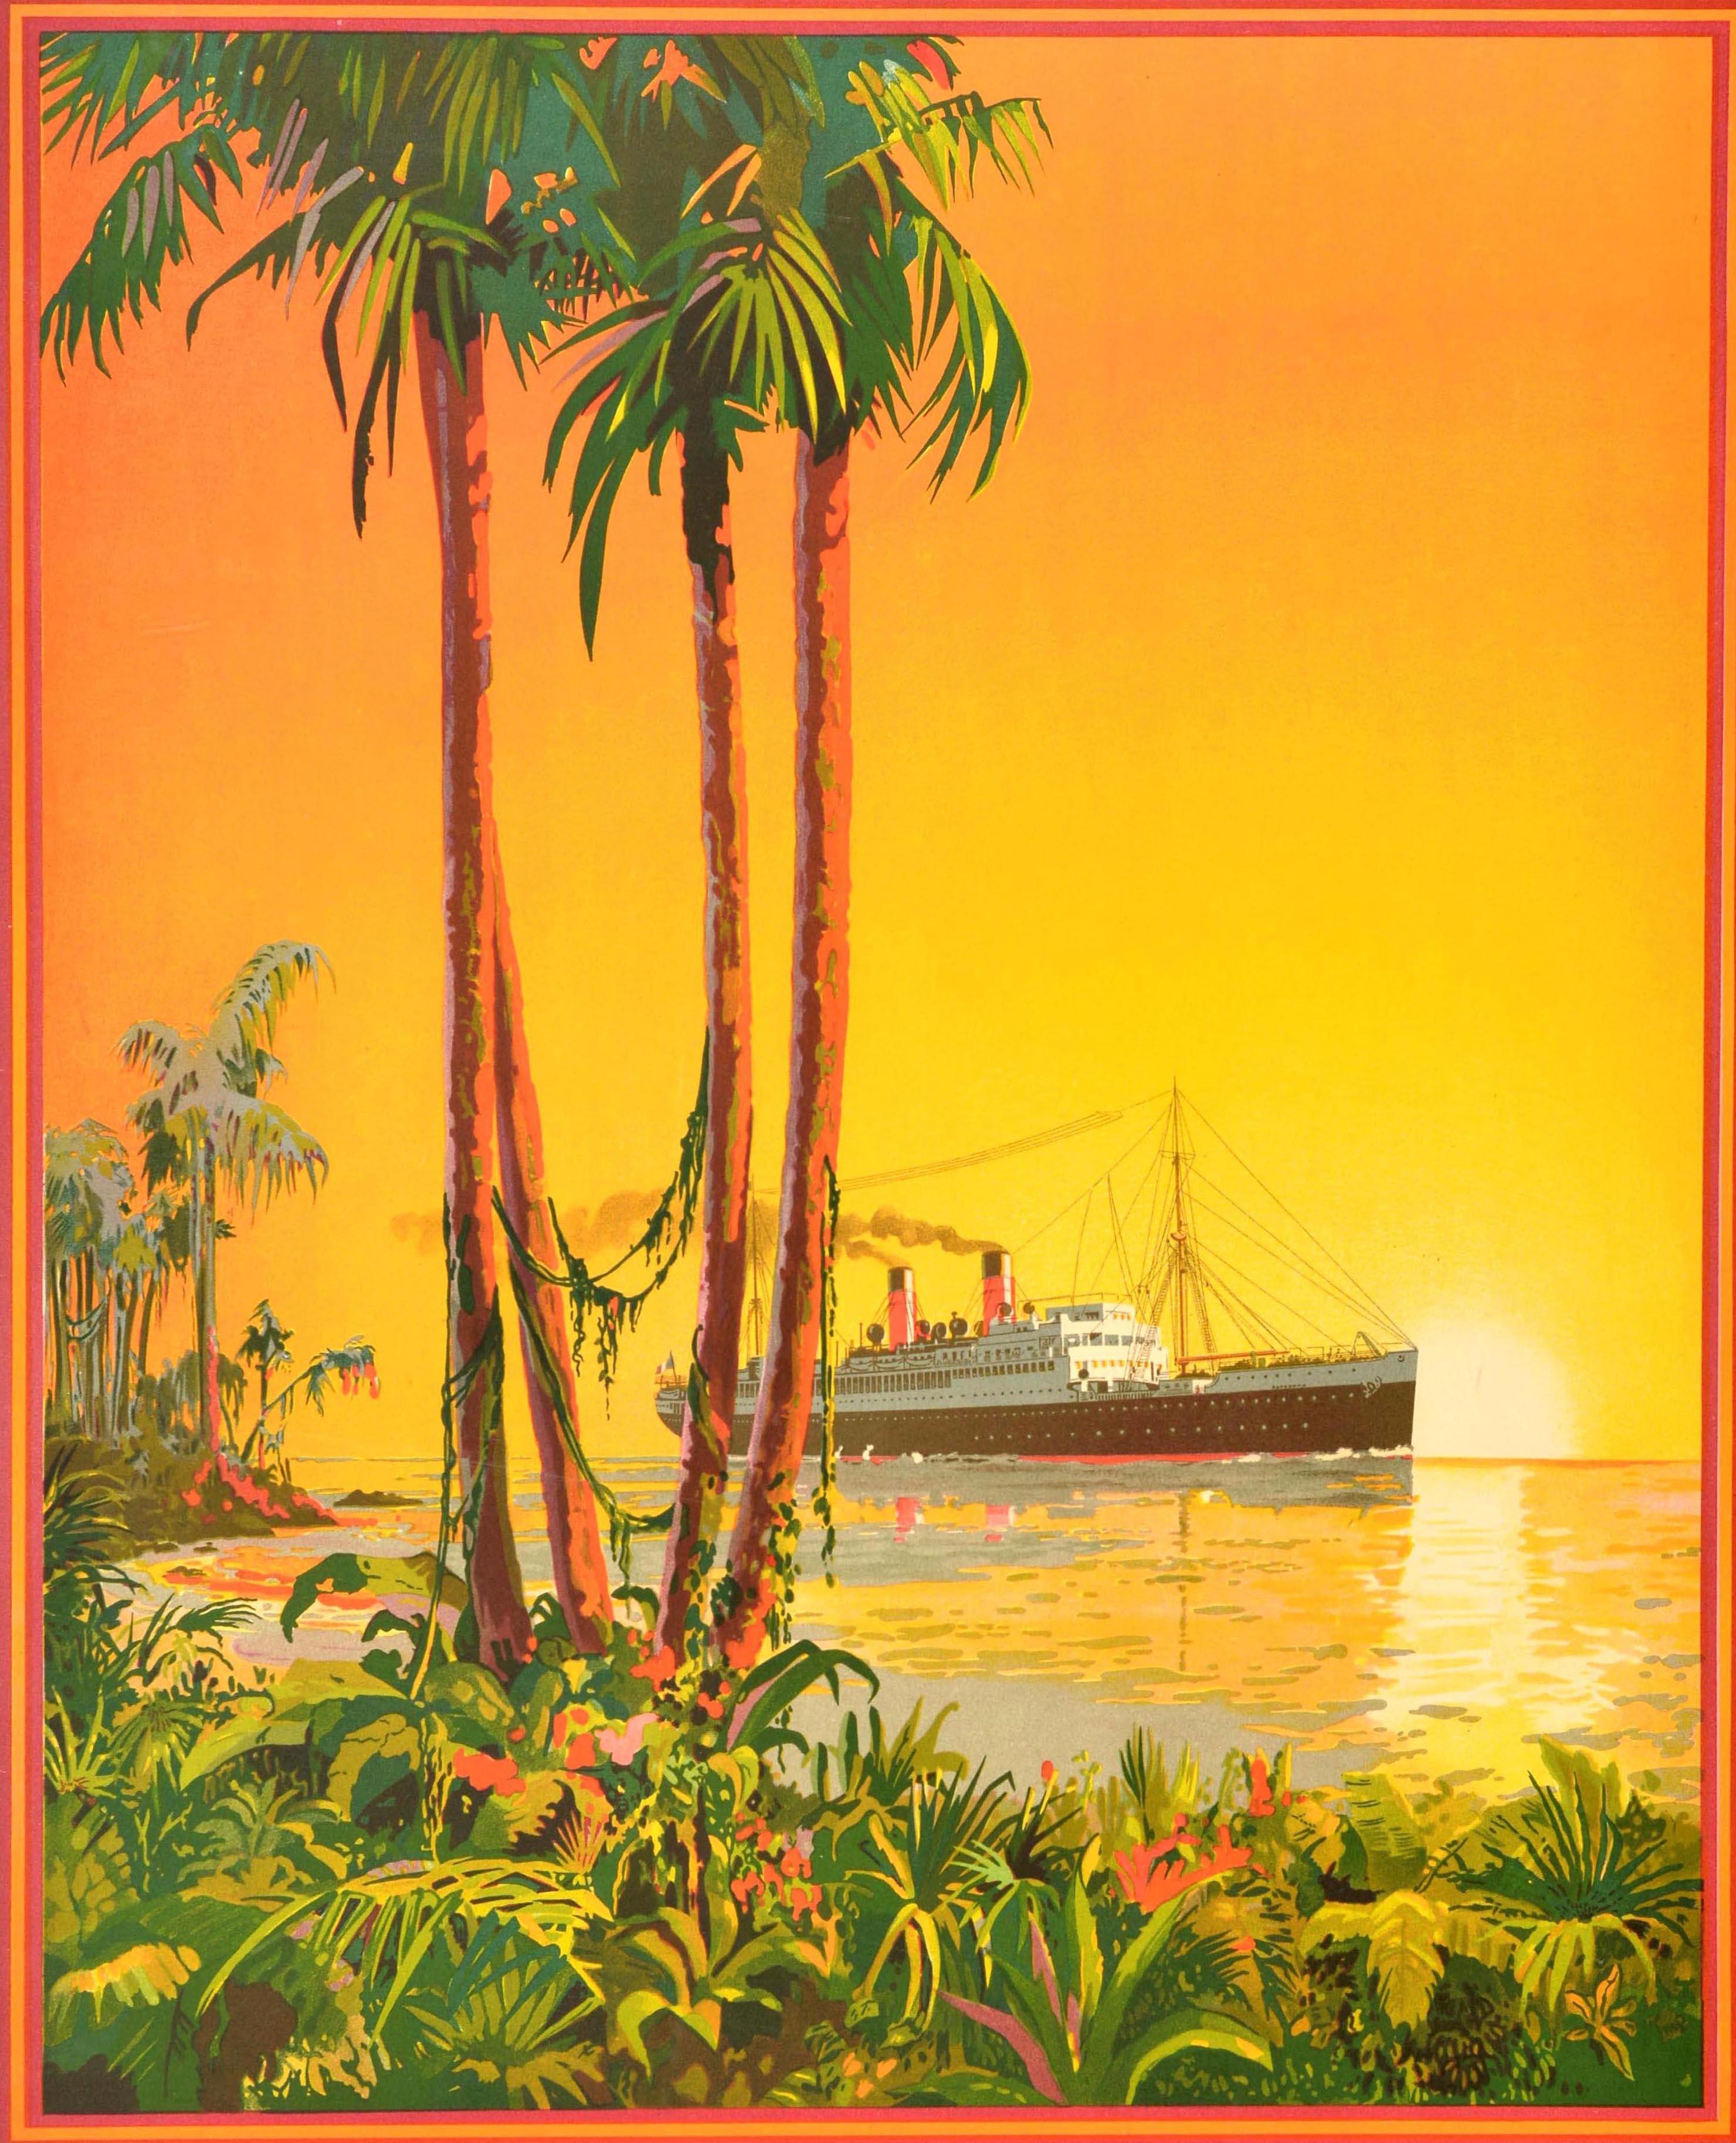 Original vintage cruise ship travel poster advertising Plymouth and Panama to the Spanish Main & West Indies The largest and fastest mail steamers from England by French Line (founded in 1861 - Compagnie Generale Transatlantique; CGT). Stunning